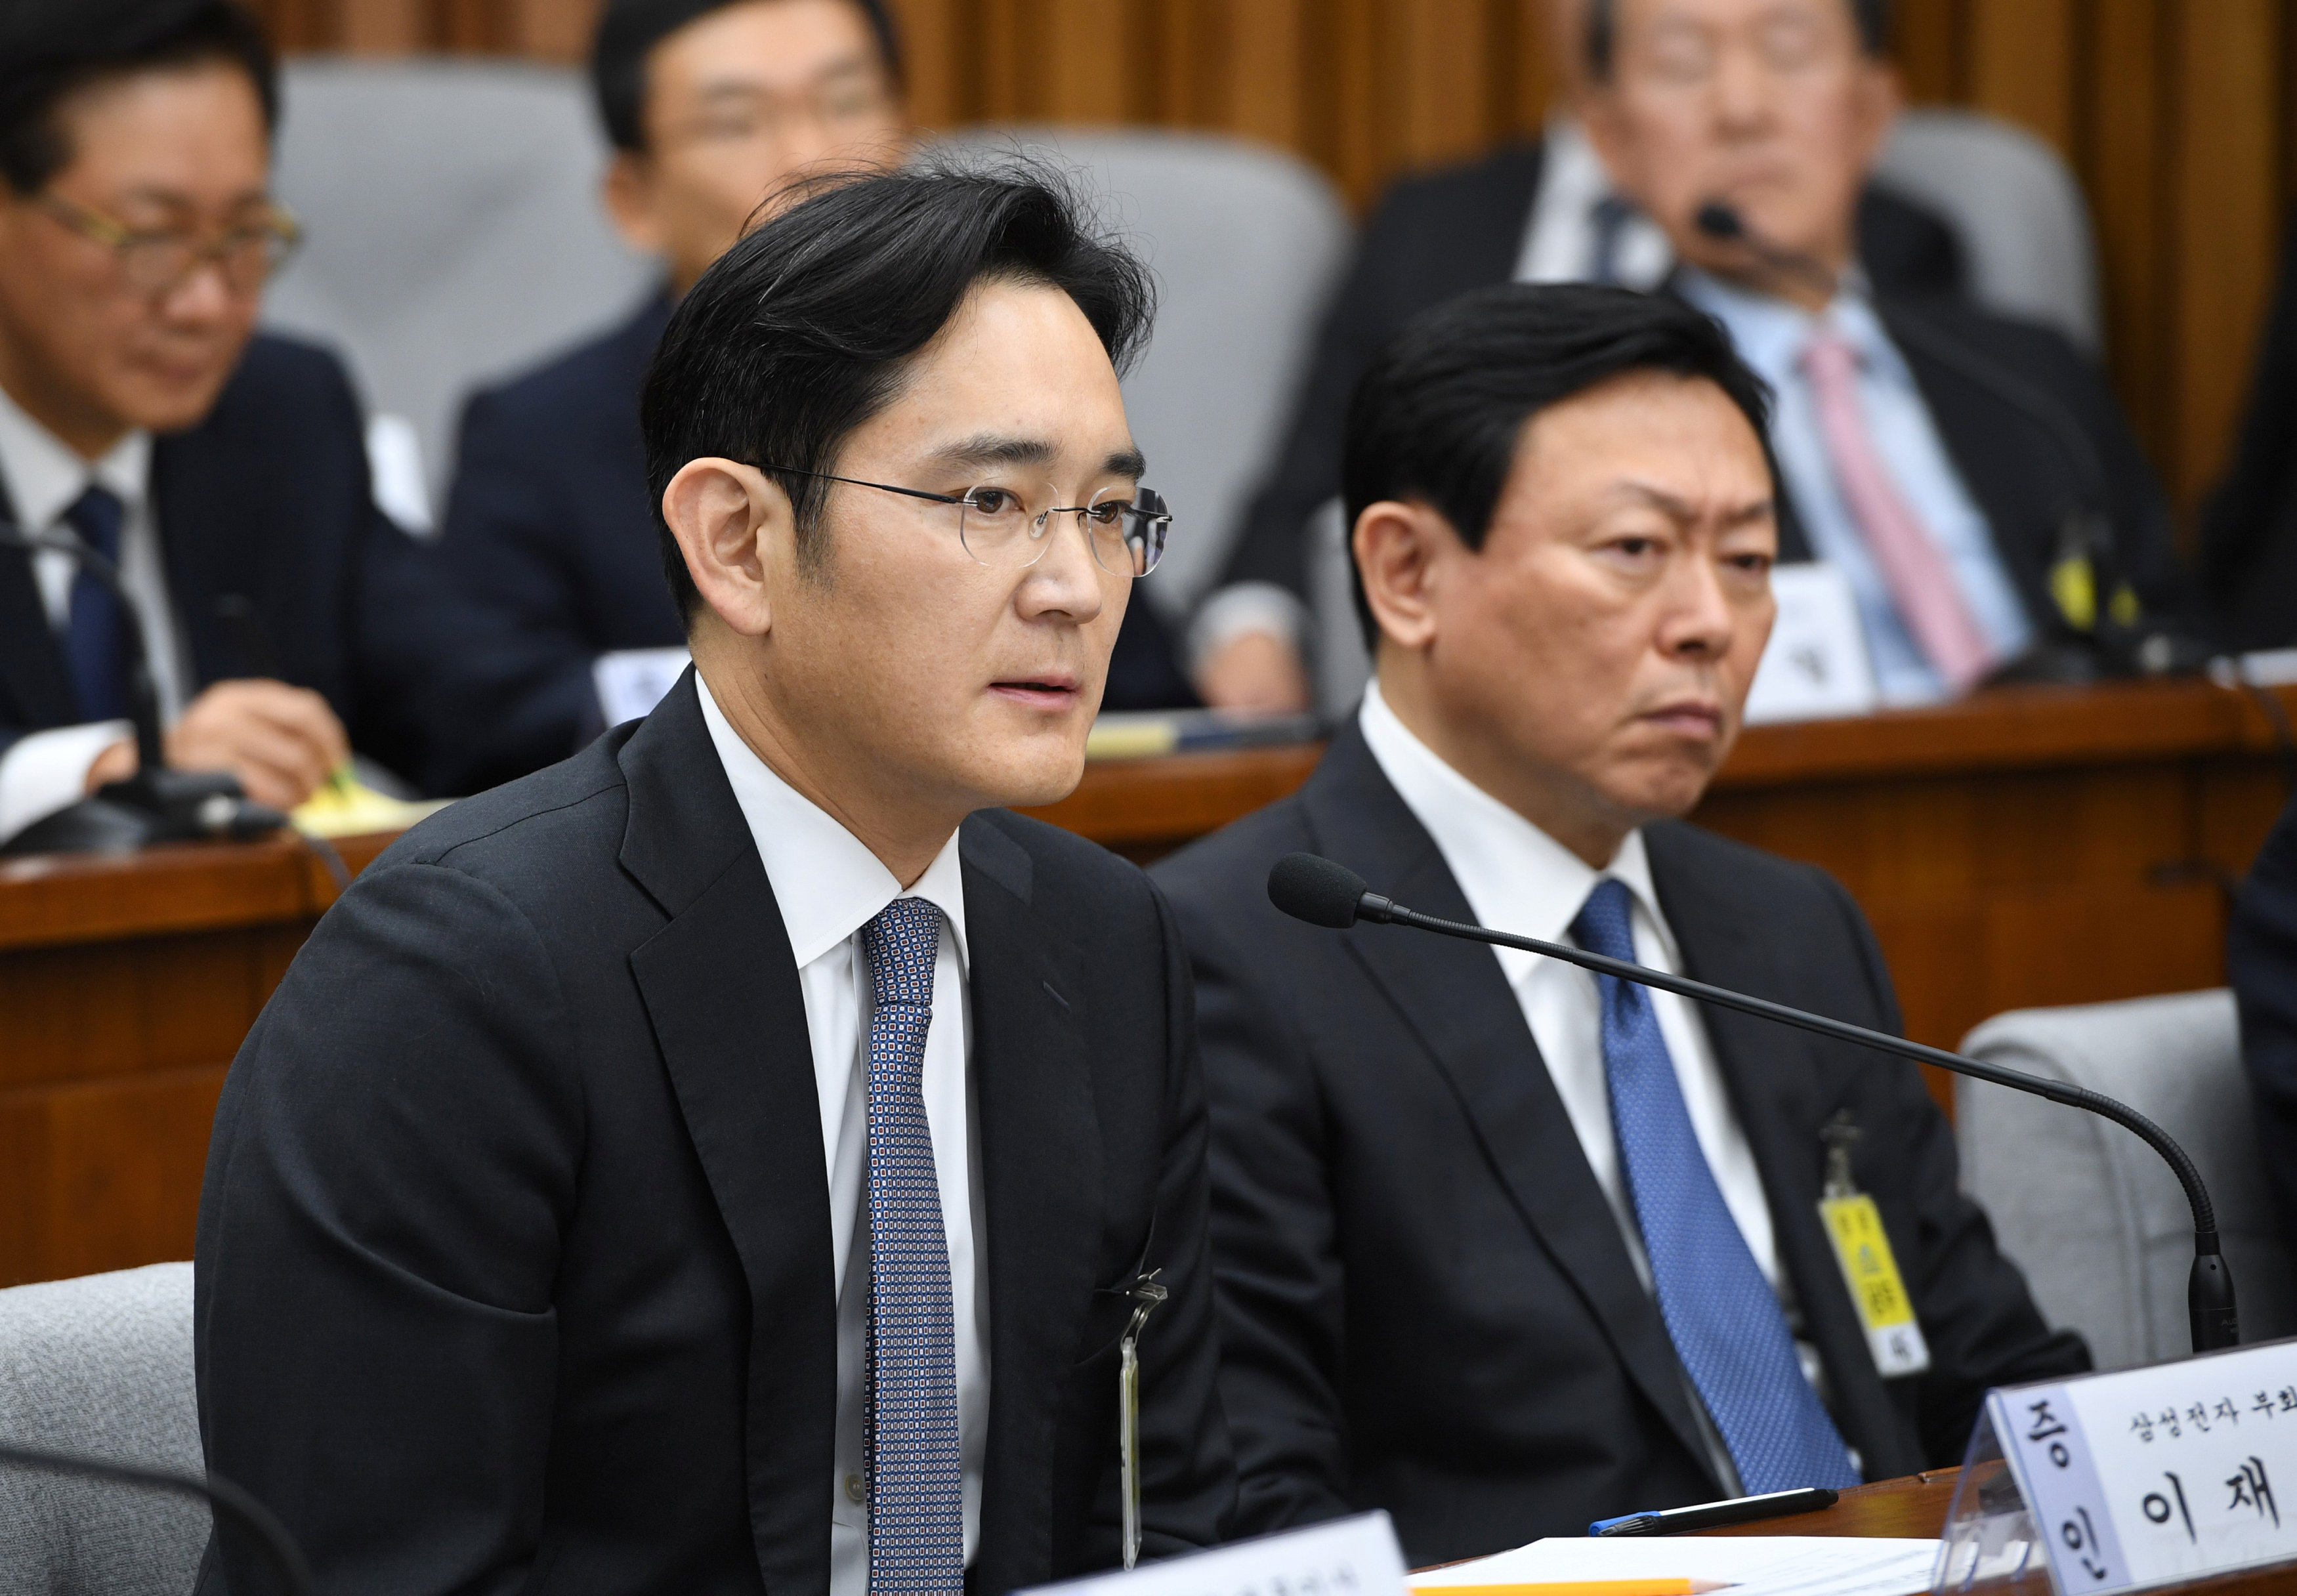 Samsung Group's heir-apparent Lee Jae-yong (L) answers a question as Lotte Group Chairman Shin Dong-Bin (R) listens during a parliamentary probe into a scandal engulfing President Park Geun-Hye at the National Assembly in Seoul on December 6, 2016. The pu